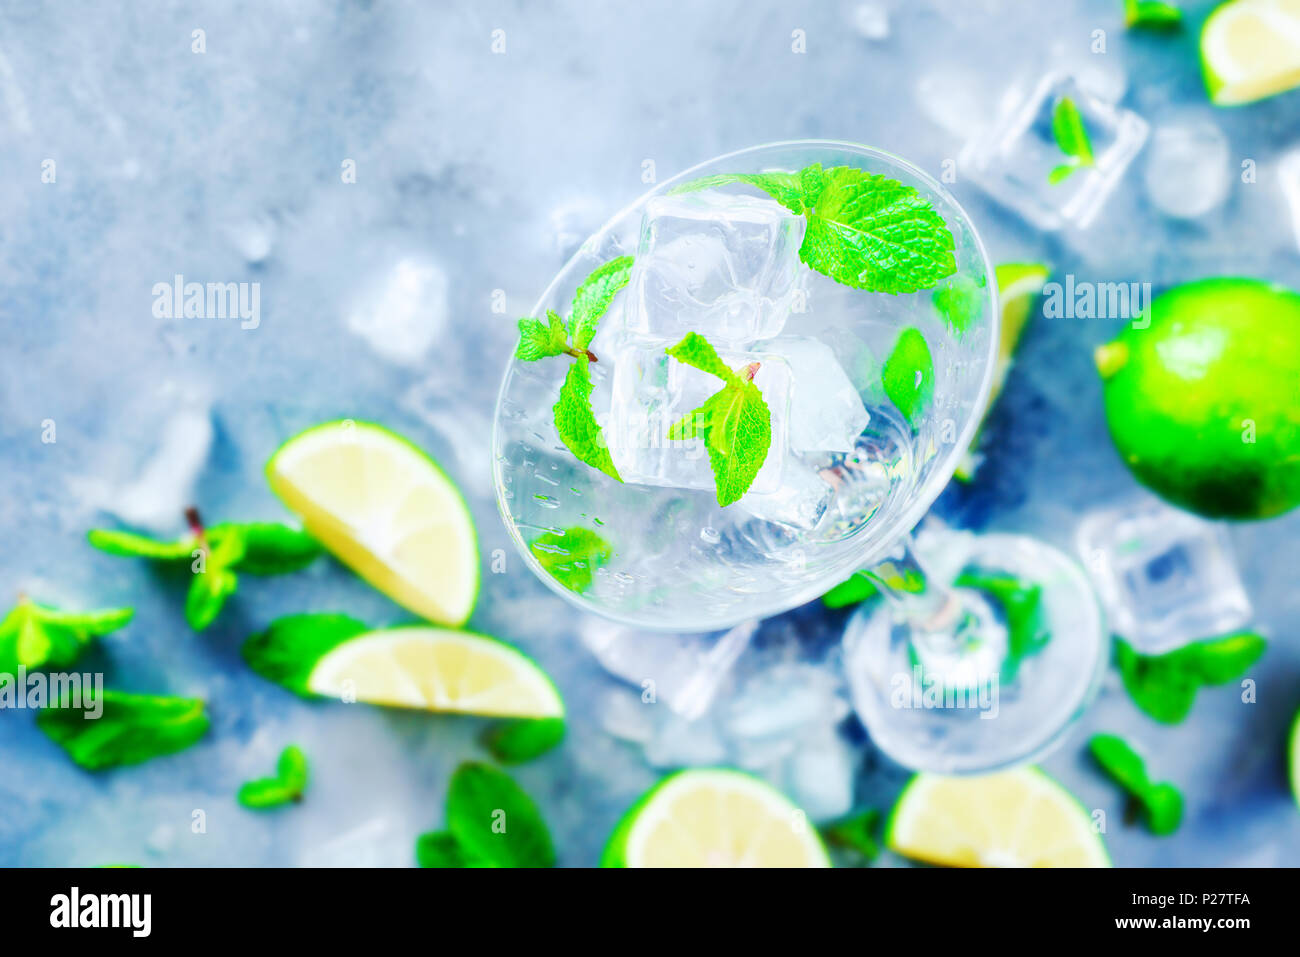 Martini glass with mojito cocktail ingredients, mint, lime and ice cubes on a stone background. Summer refreshment flat lay. Preparing drinks concept  Stock Photo